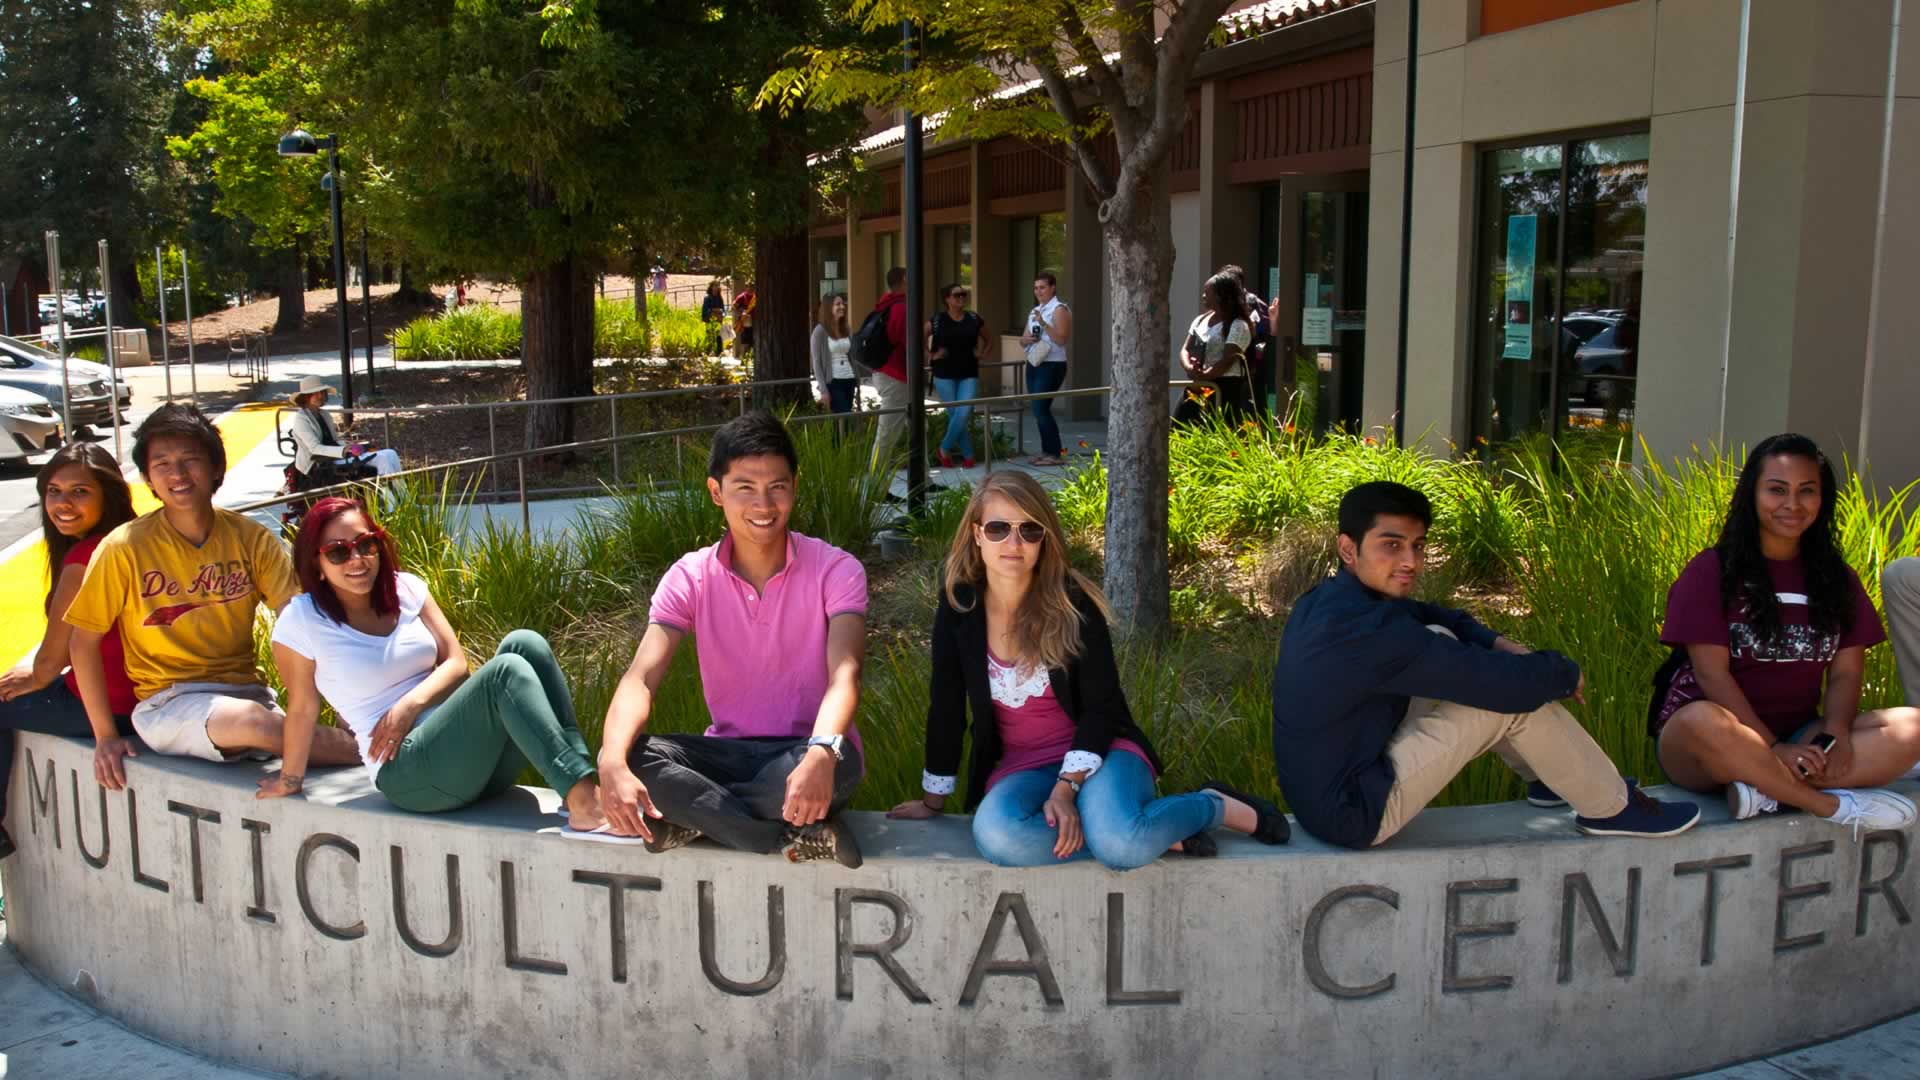 Students on the Multicultural Center sign